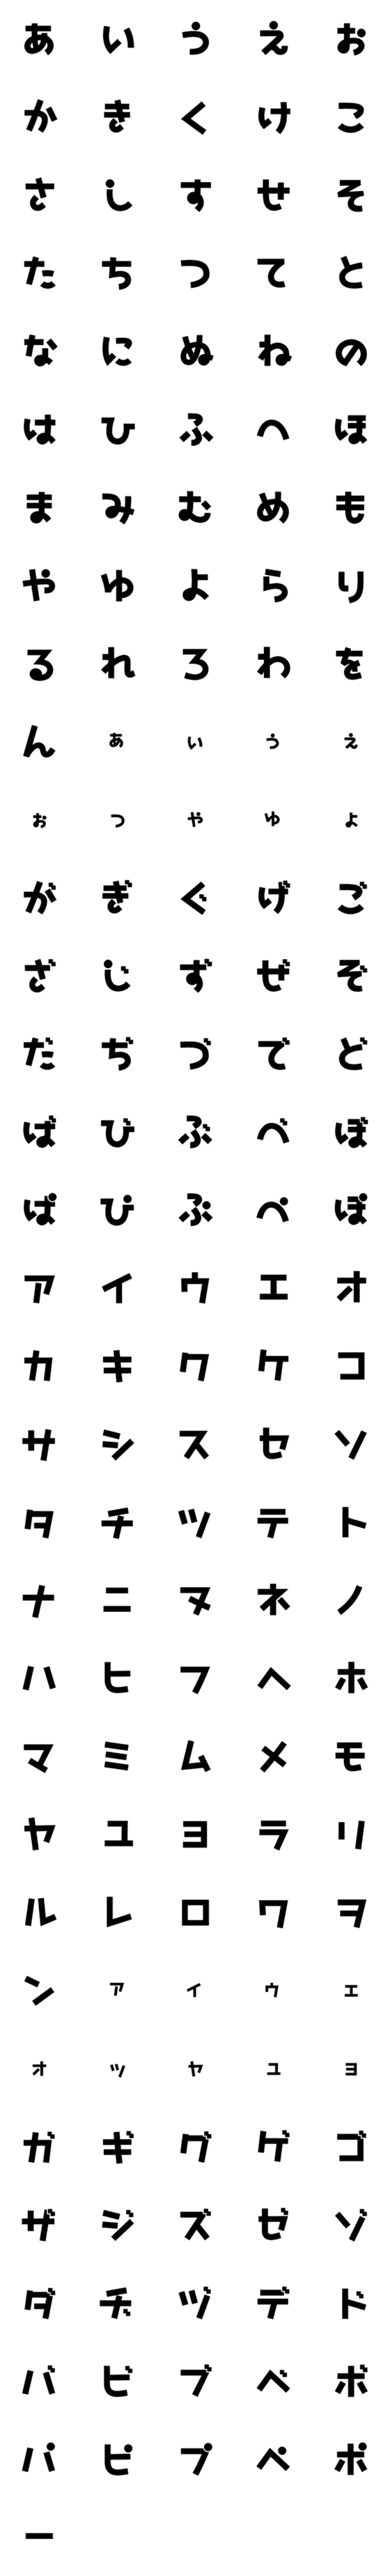 [LINE絵文字]まじっく デコ文字の画像一覧